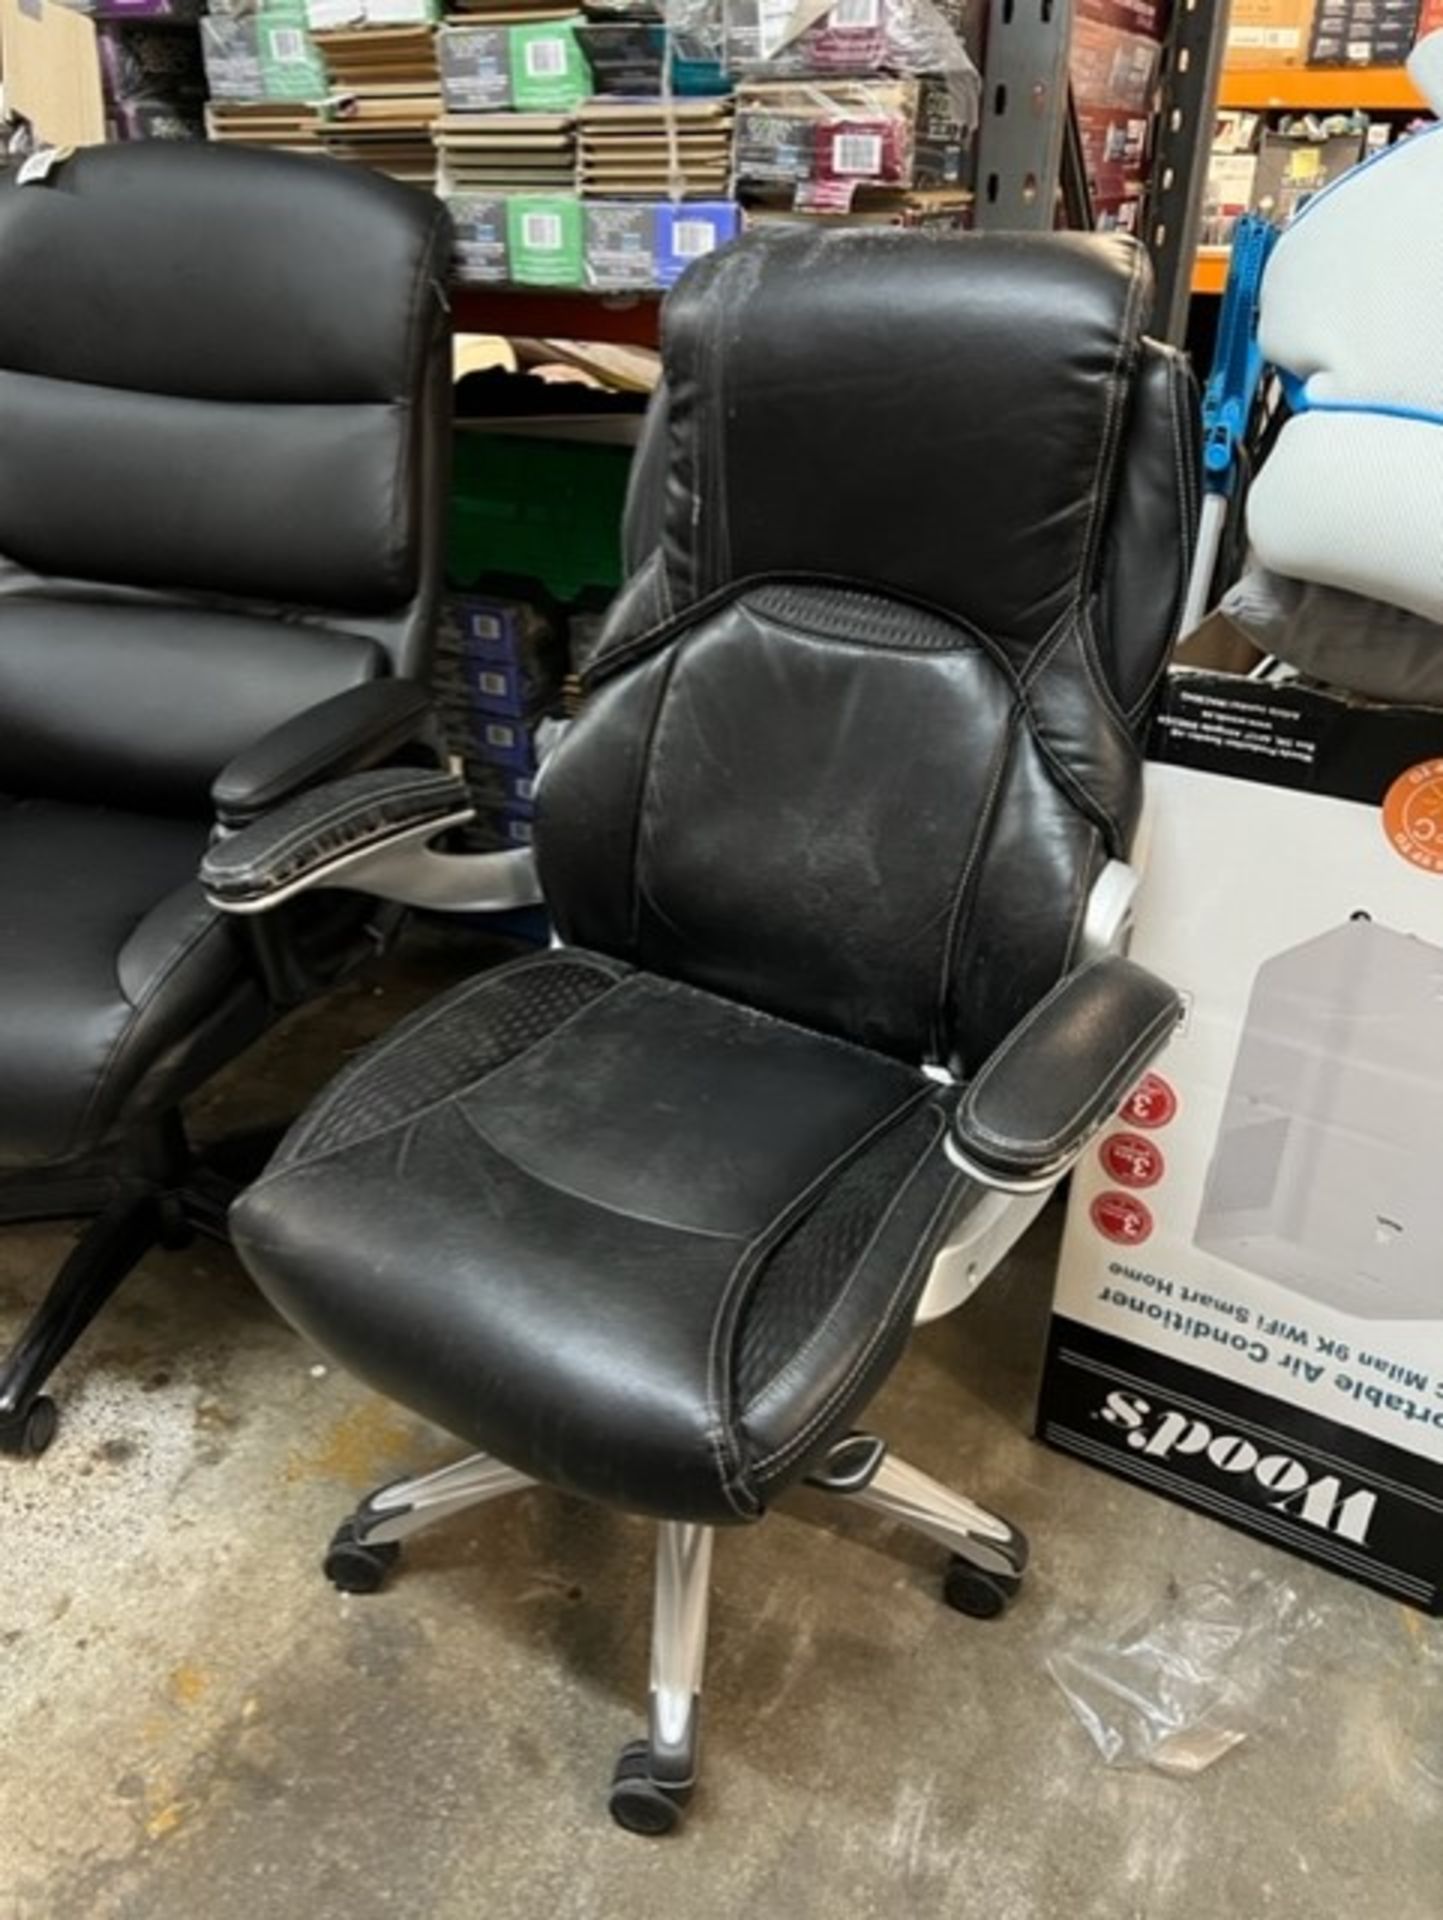 1 TRUE INNOVATIONS MANAGERS OFFICE CHAIR RRP Â£179 (HEAVILY USED)